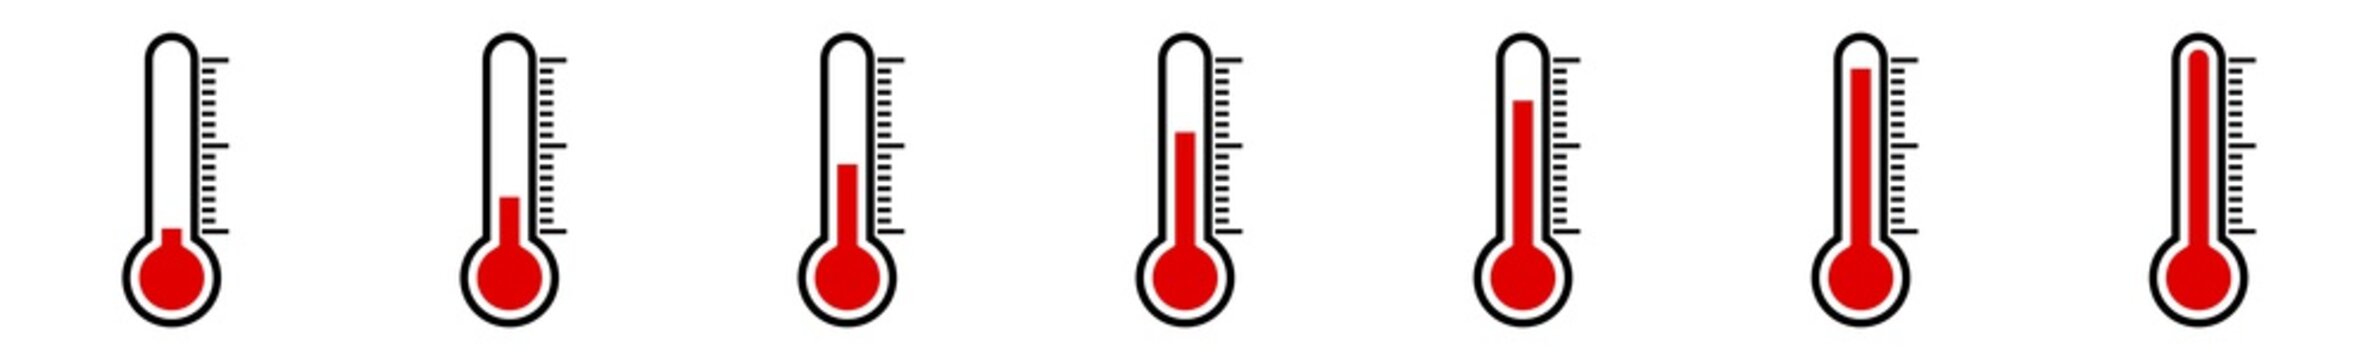 Thermometer Icon Red | Temperature Scale Symbol | Instrument Logo | Warm Cold Illustration | Weather Sign | Isolated | Variations